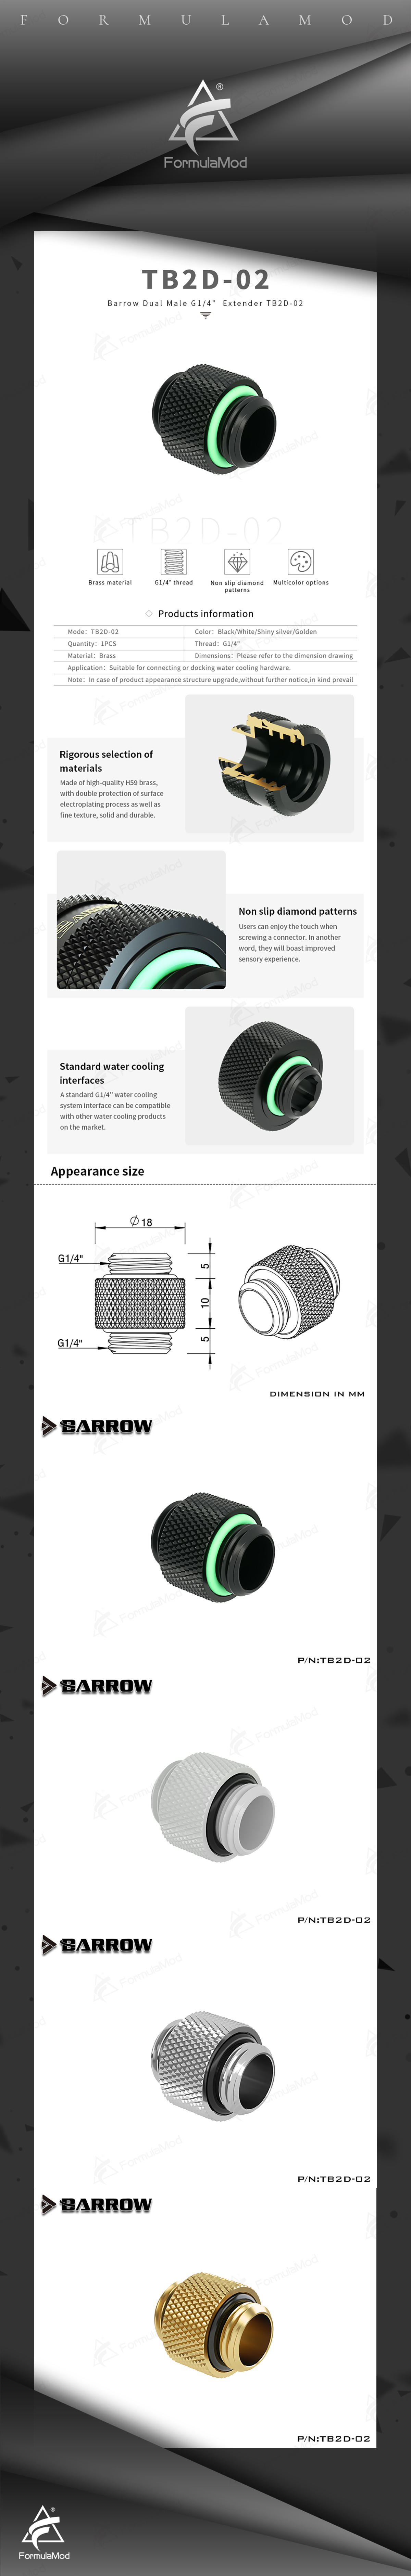 Barrow Male To Male Fitting, G1/4'' Connection Adapter,Water Cooling Fitting, TB2D-02  